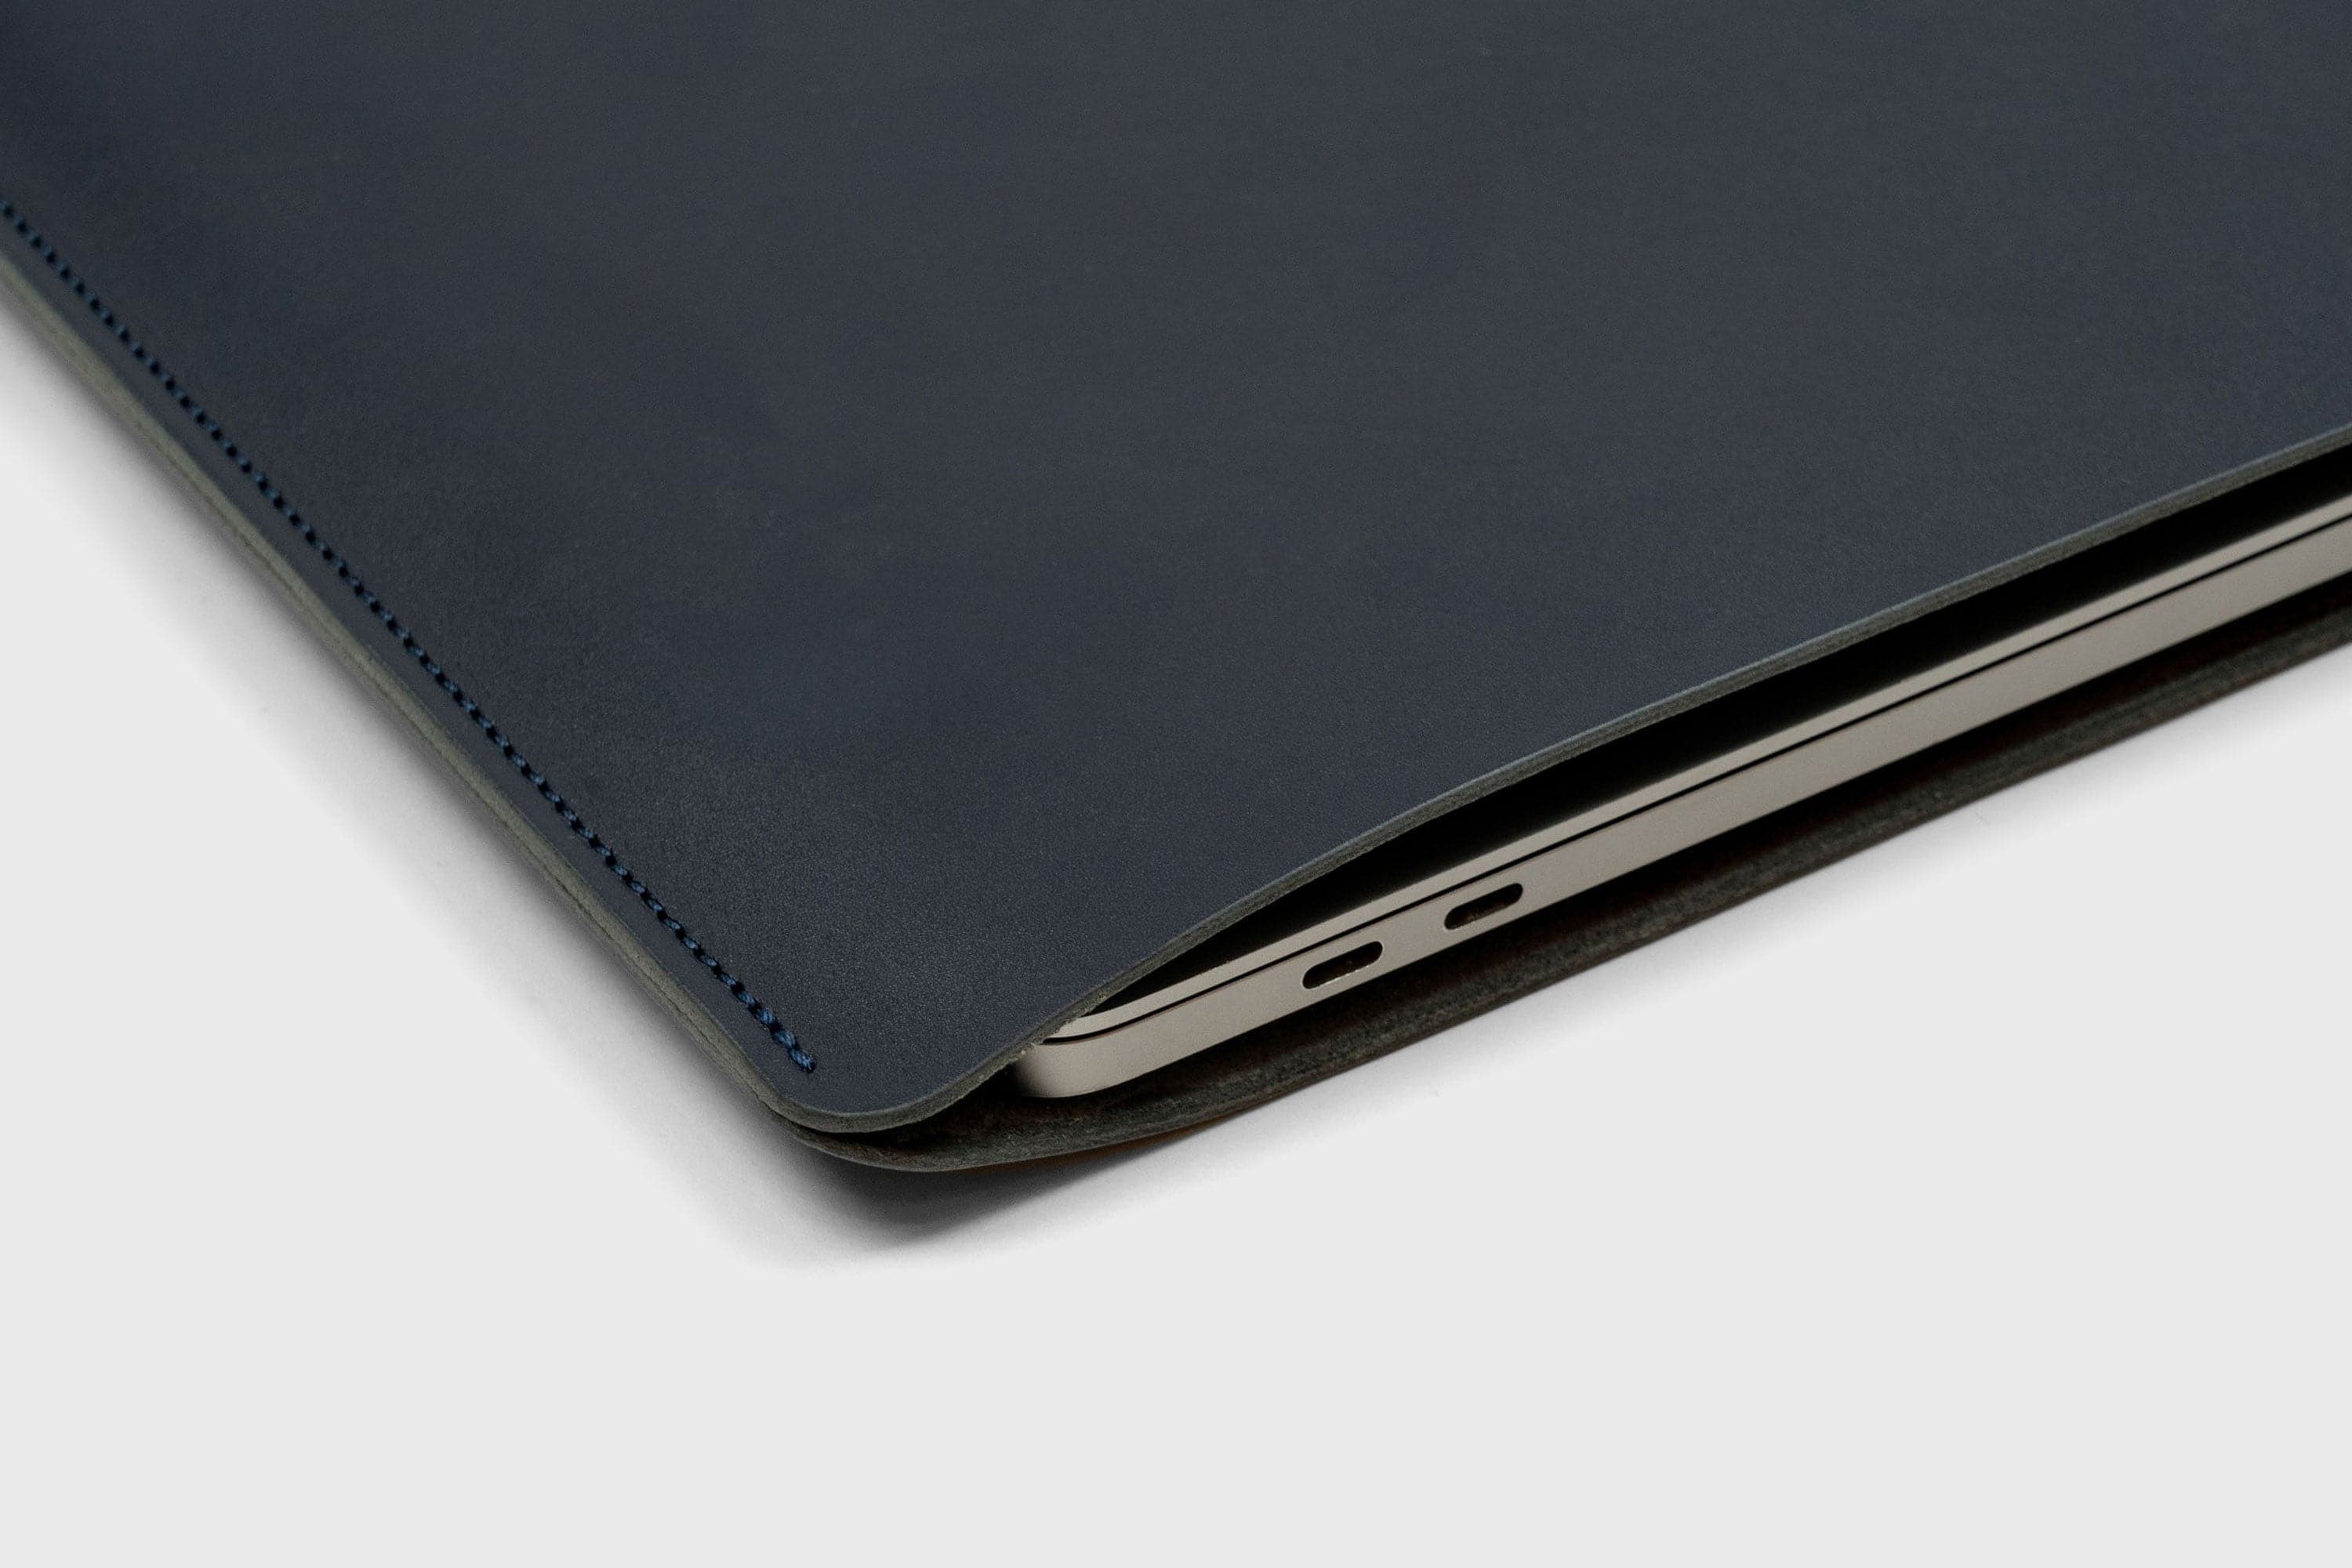 MacBook Pro 14 Inch Sleeve Leather Thick Leather Dark Marine Blue Vegetable Tanned Leather Design Manuel Dreesmann Atelier Madre Barcelona Spain